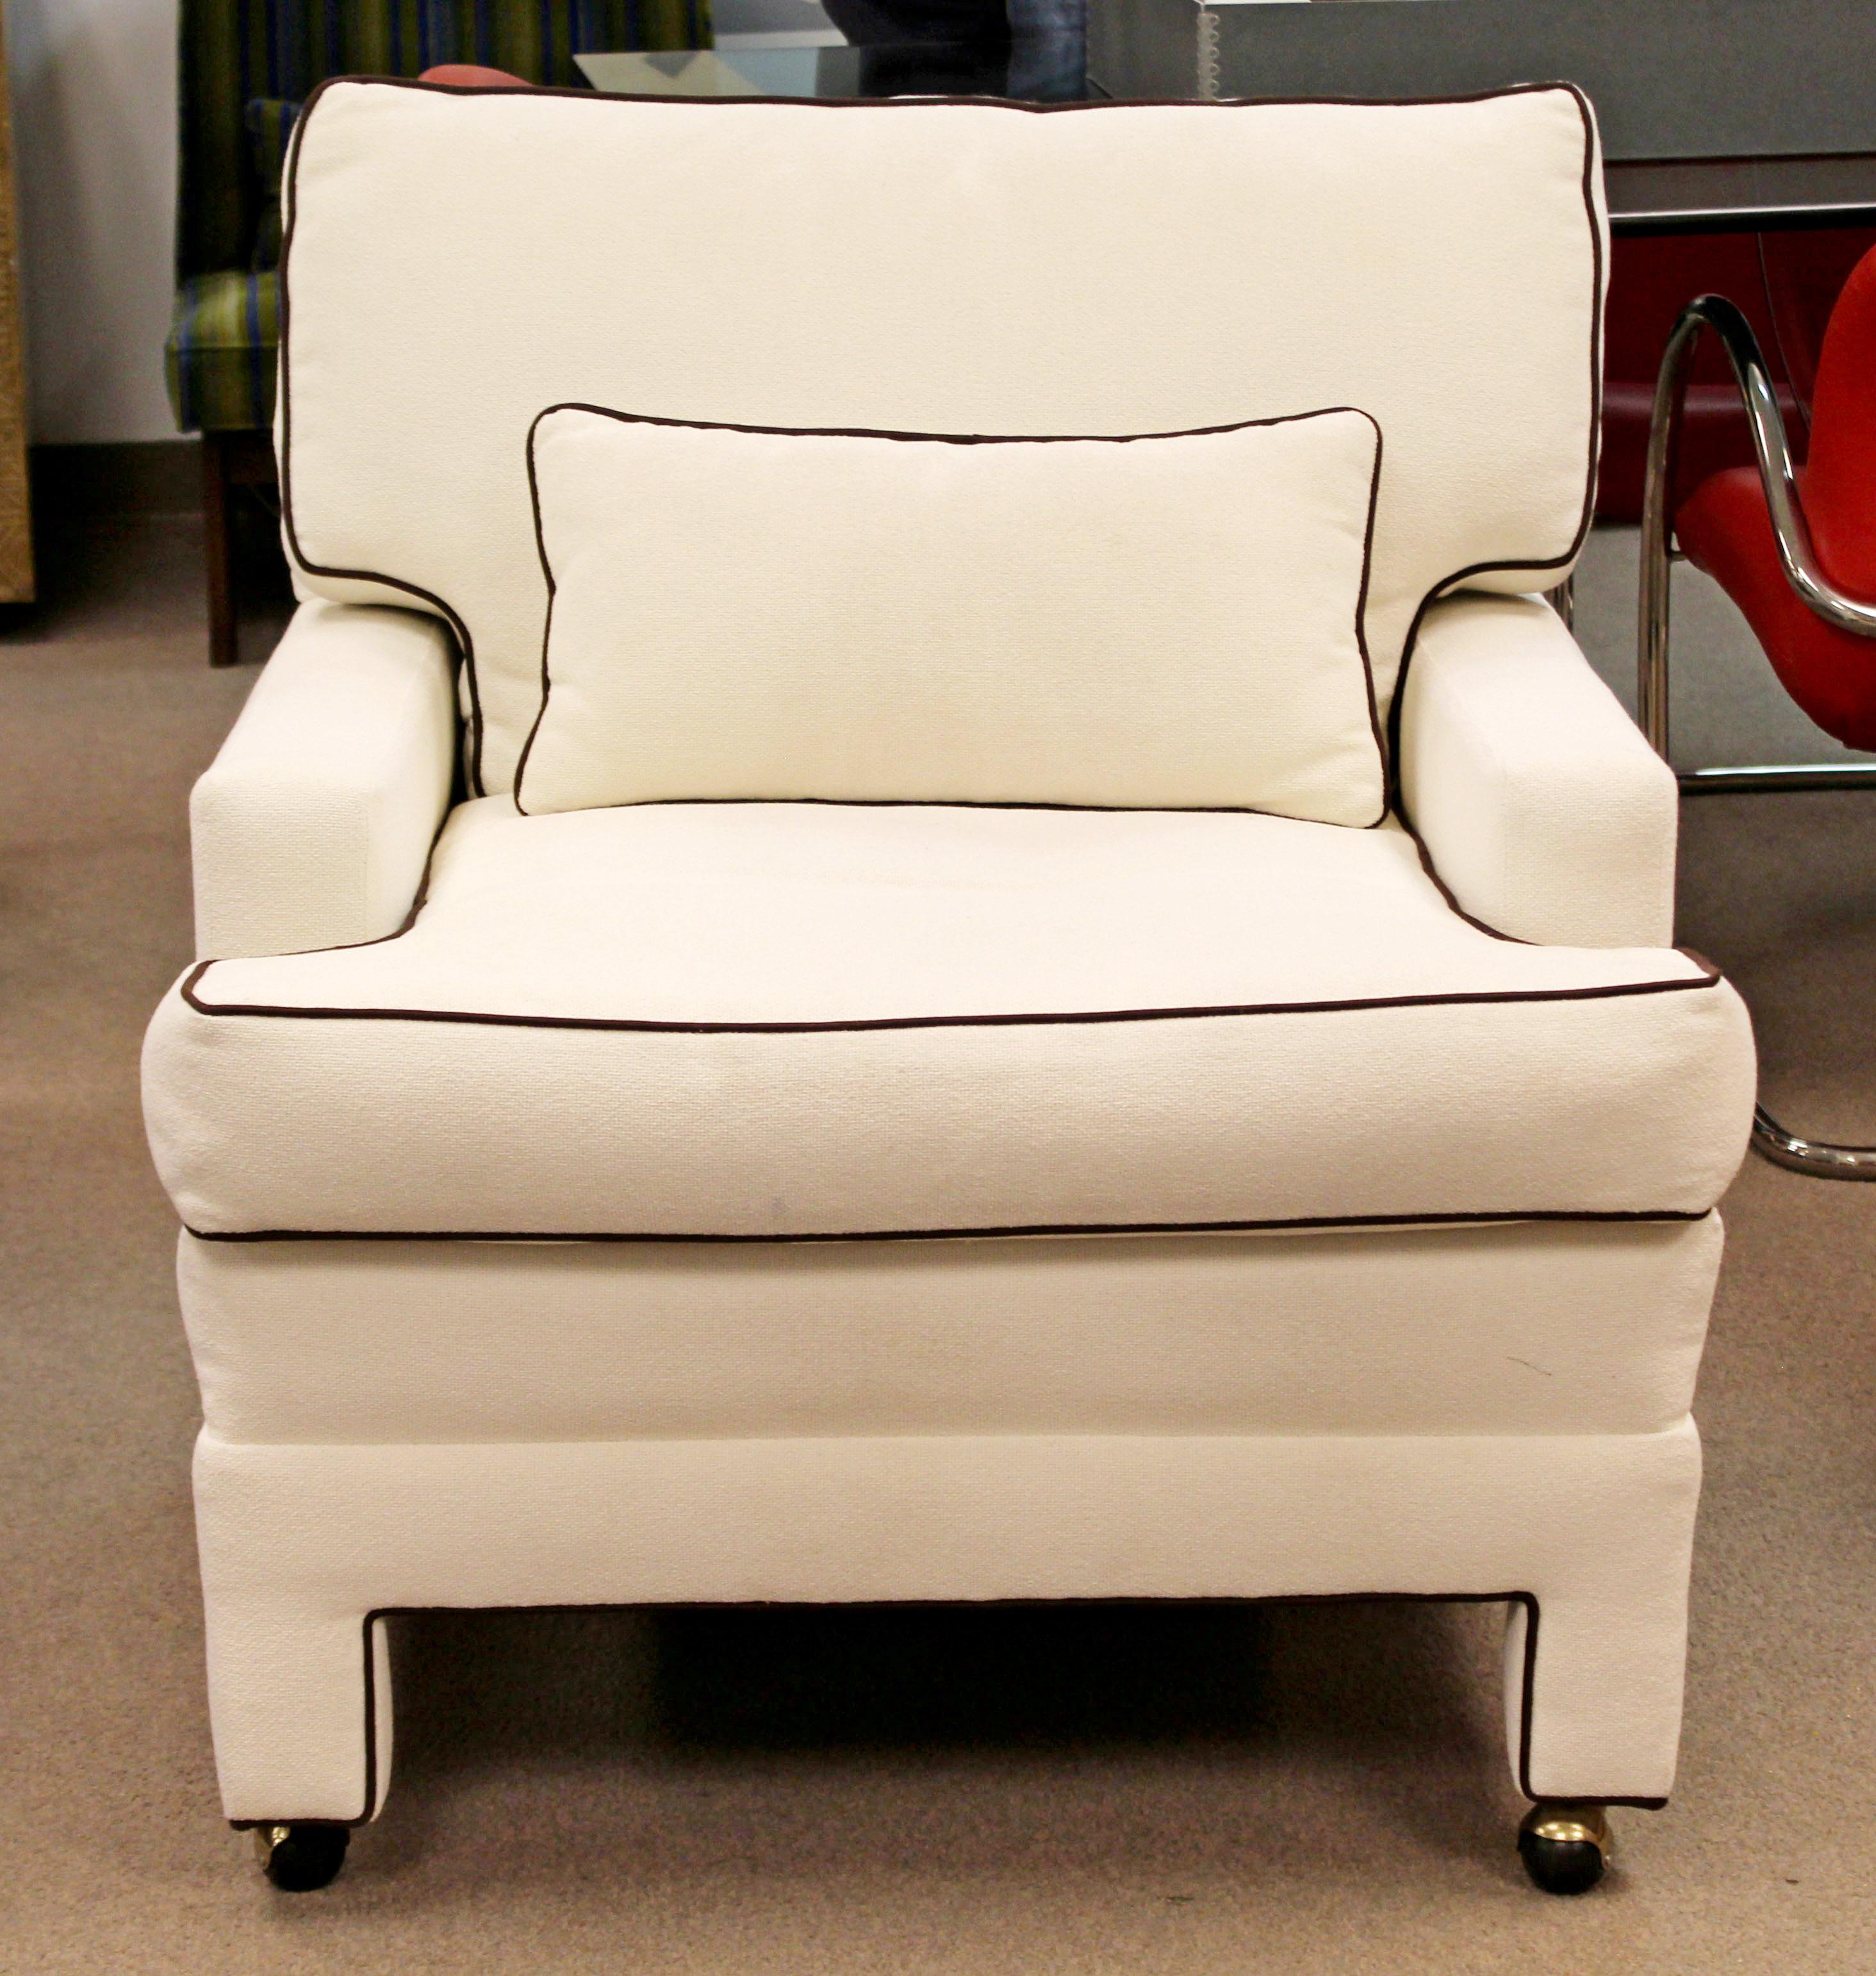 For your consideration is a massive, plush armchair, in a white fabric, with brown trim and brass casters, attributed to Milo Baughman. In excellent condition. The dimensions are 33